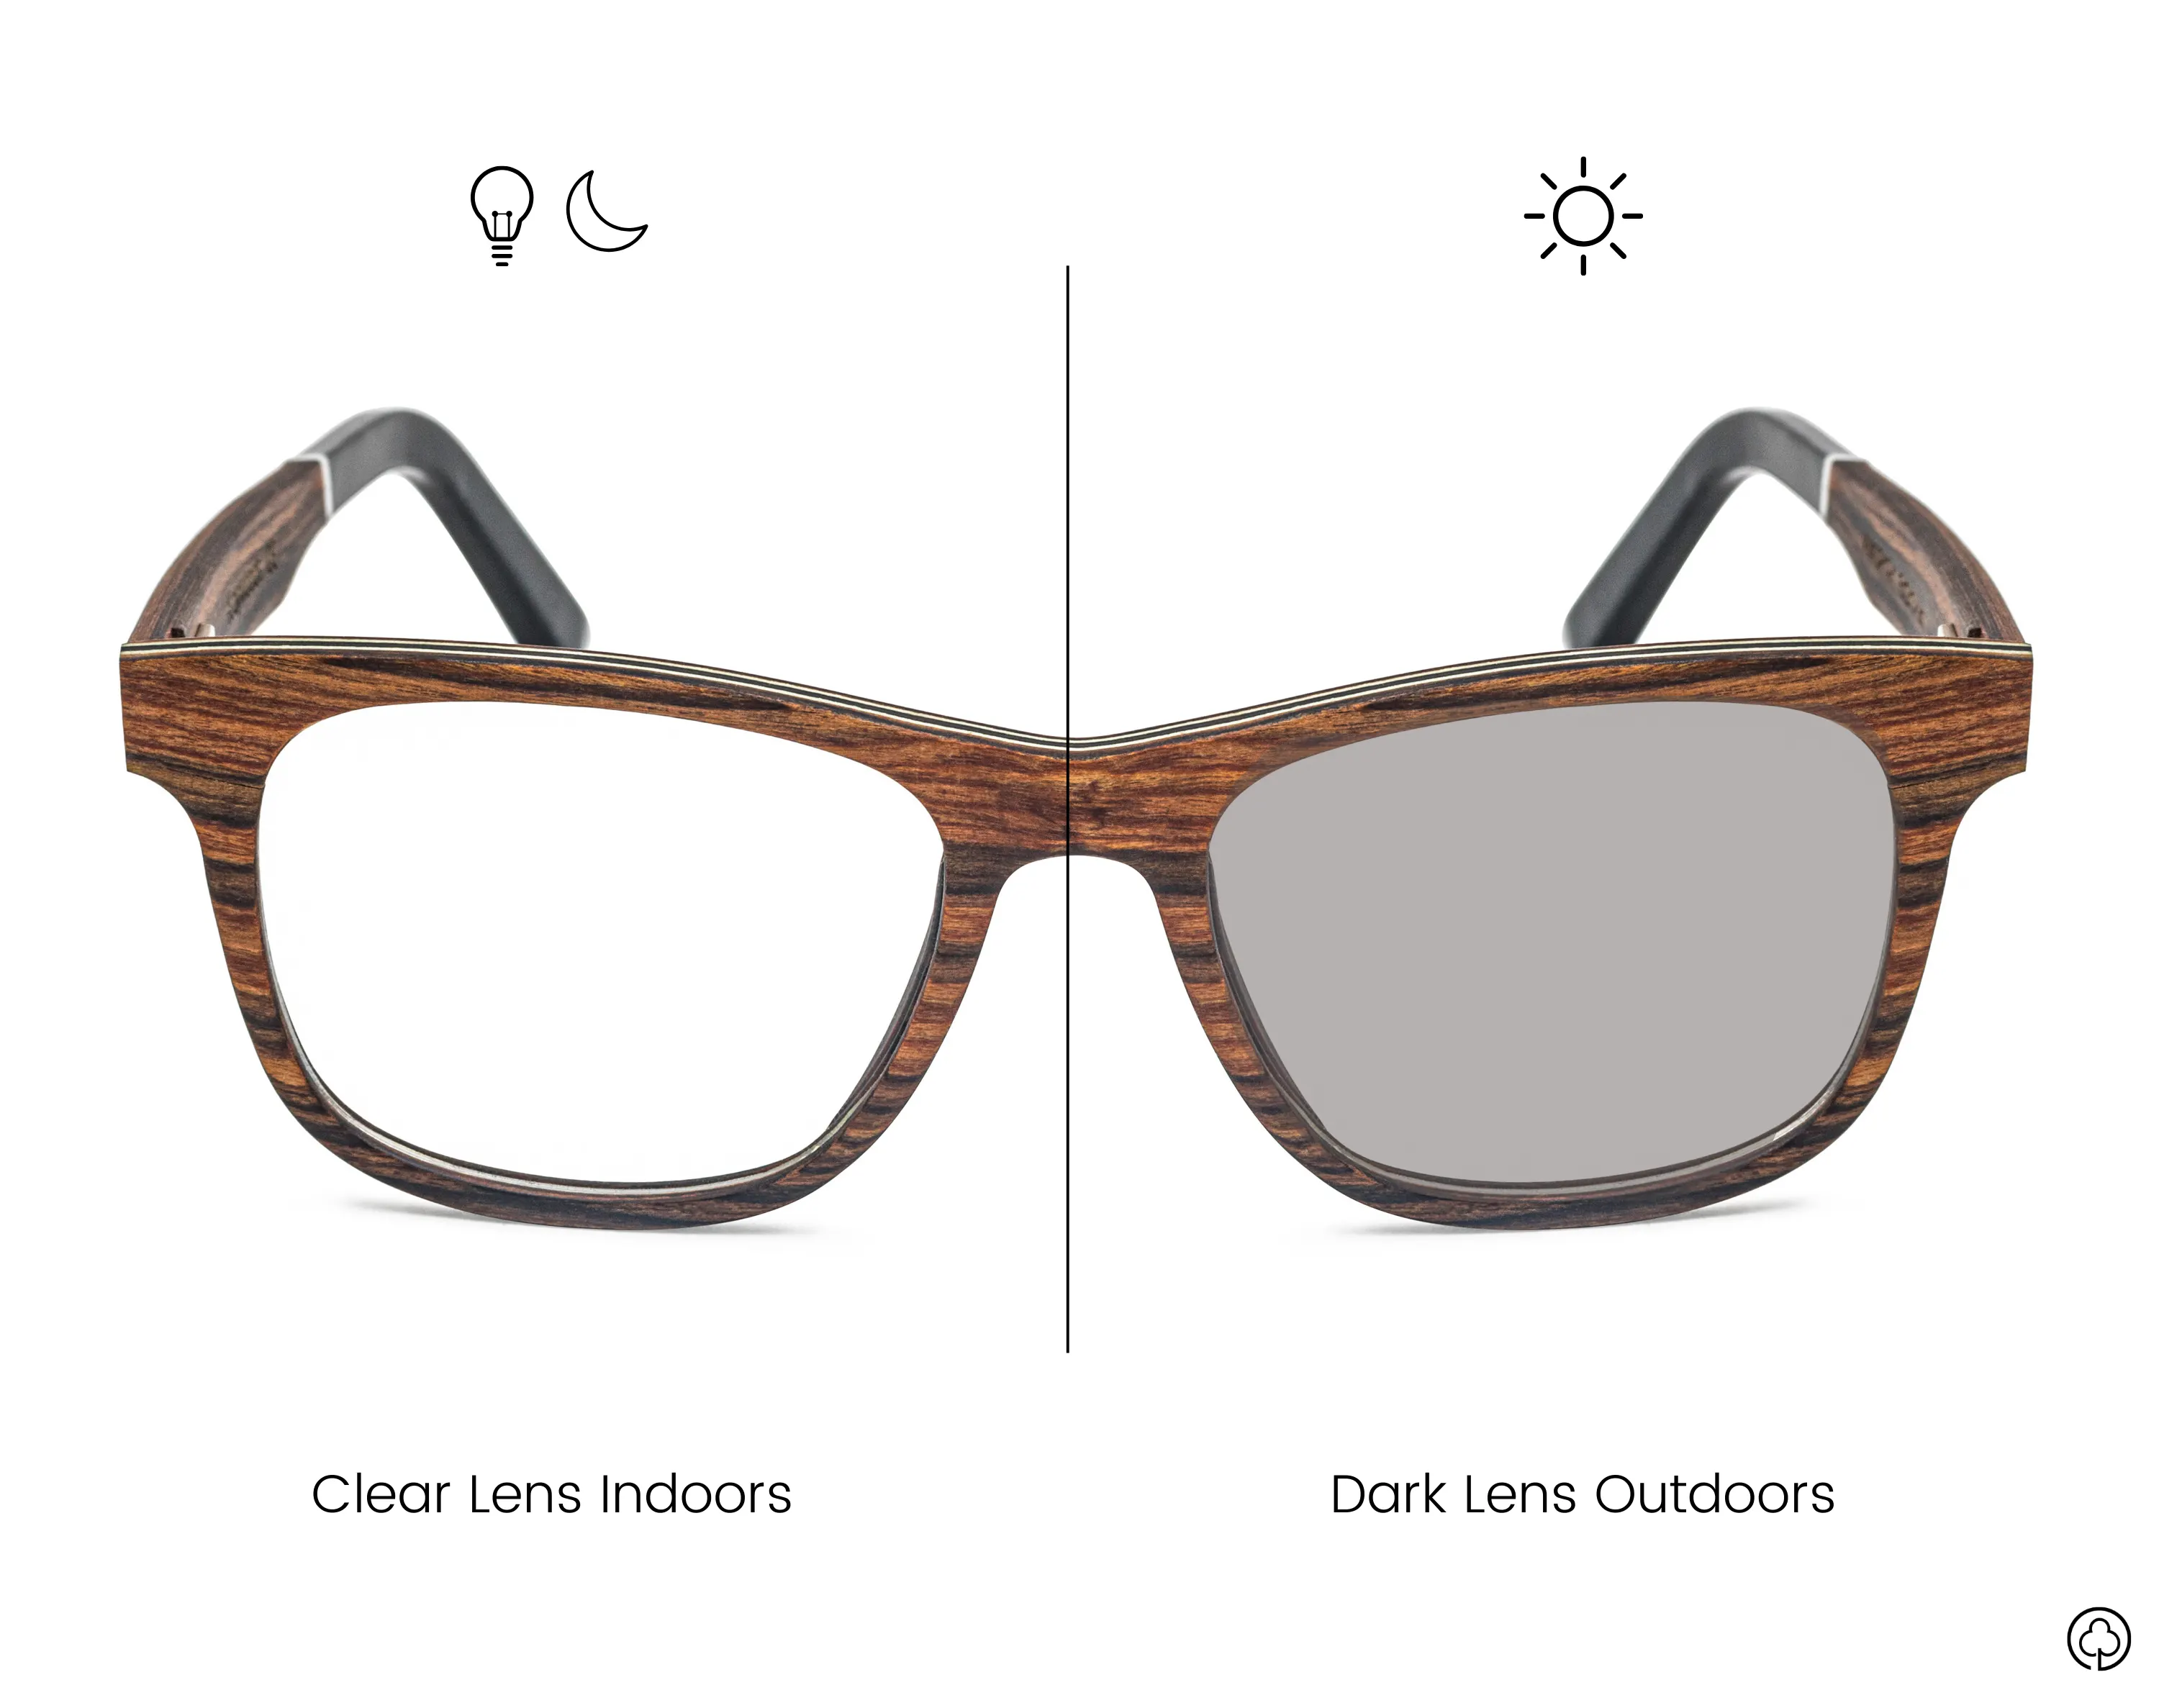 photochromic transition lenses indoors and outdoors, transition eyeglasses and sunglasses